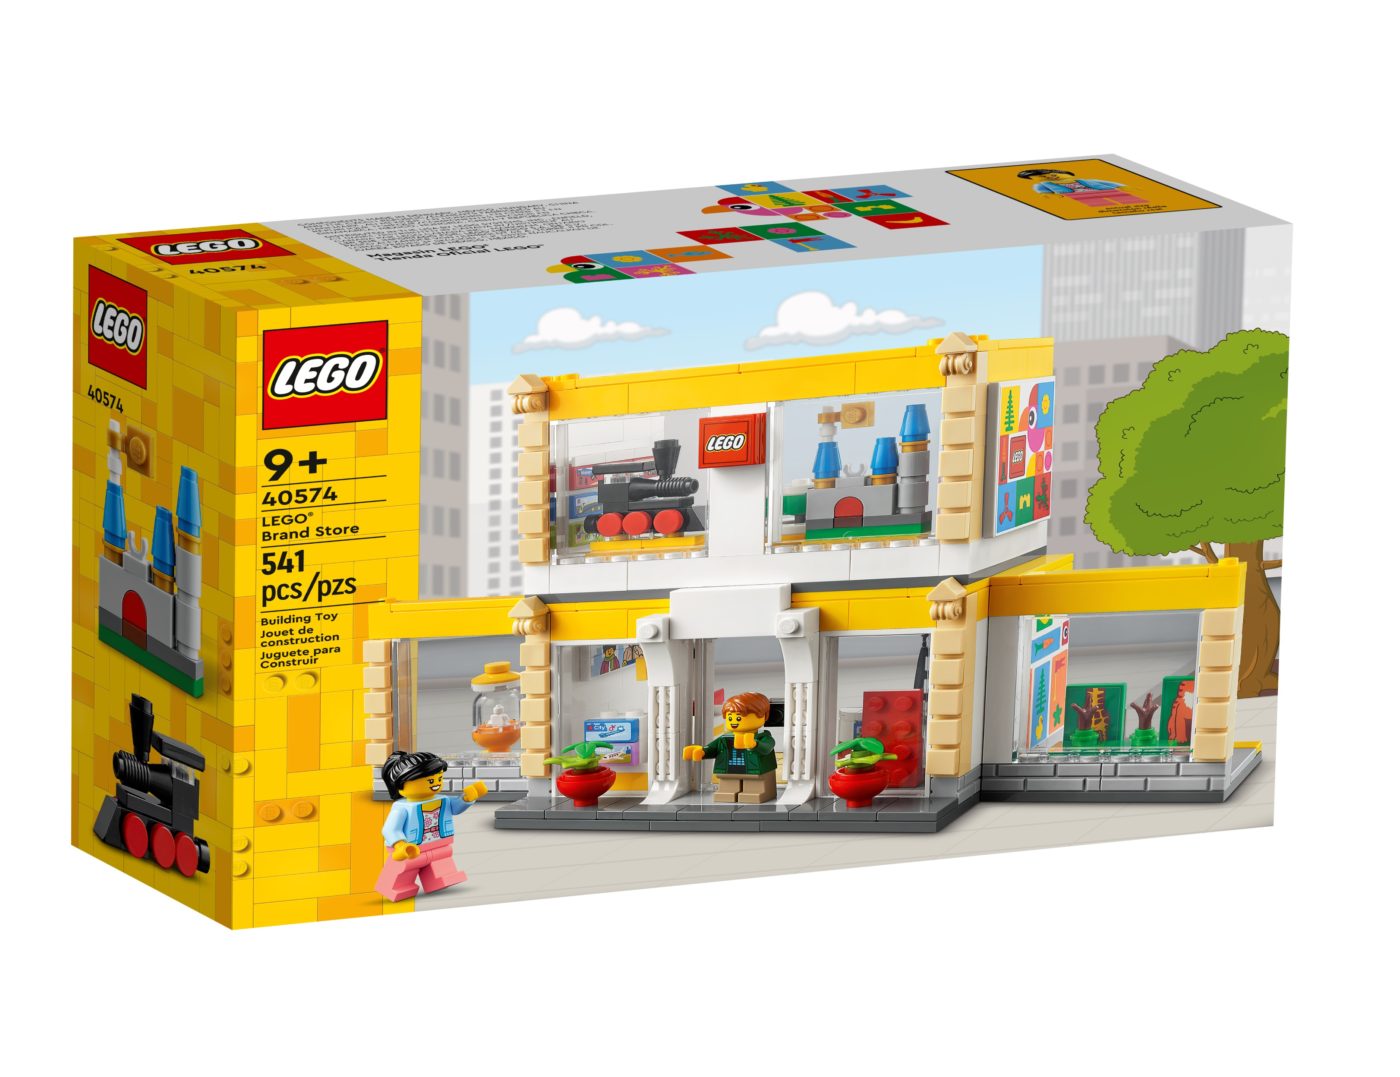 40574 LEGO Brand Store a newly updated buildable LEGO store 2022 that everyone can - Jay's Blog